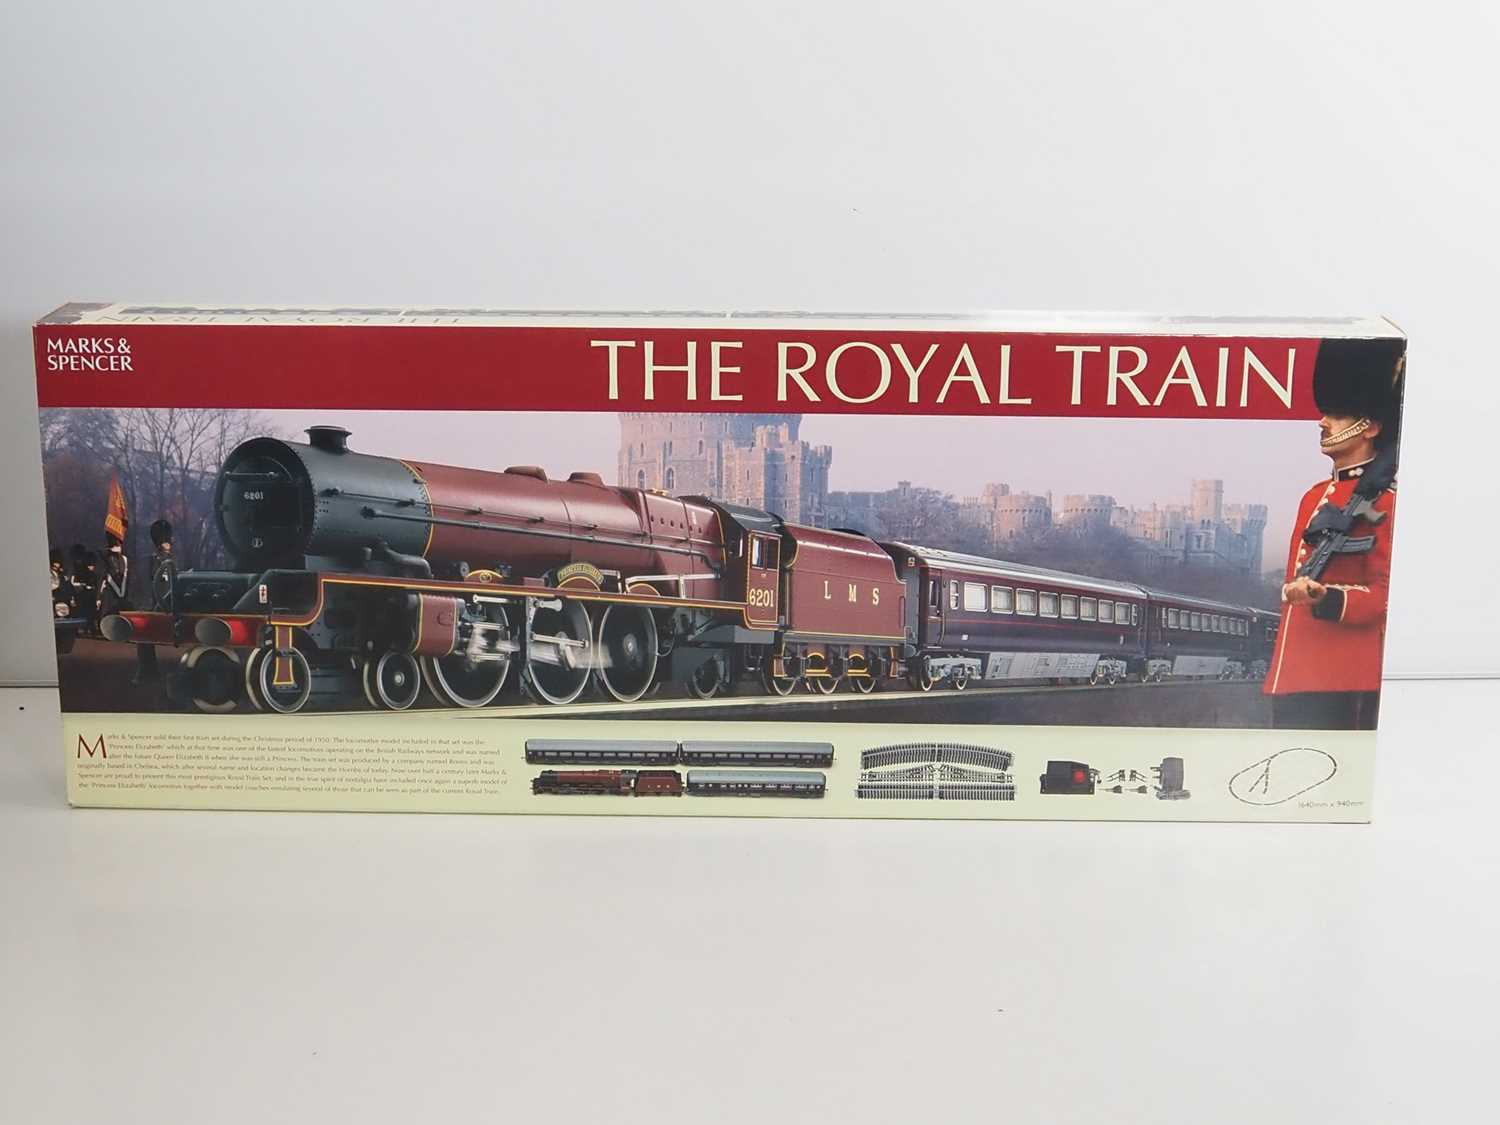 A HORNBY OO gauge Marks & Spencer limited edition 'The Royal Train' train set, appears unused and - Image 4 of 5